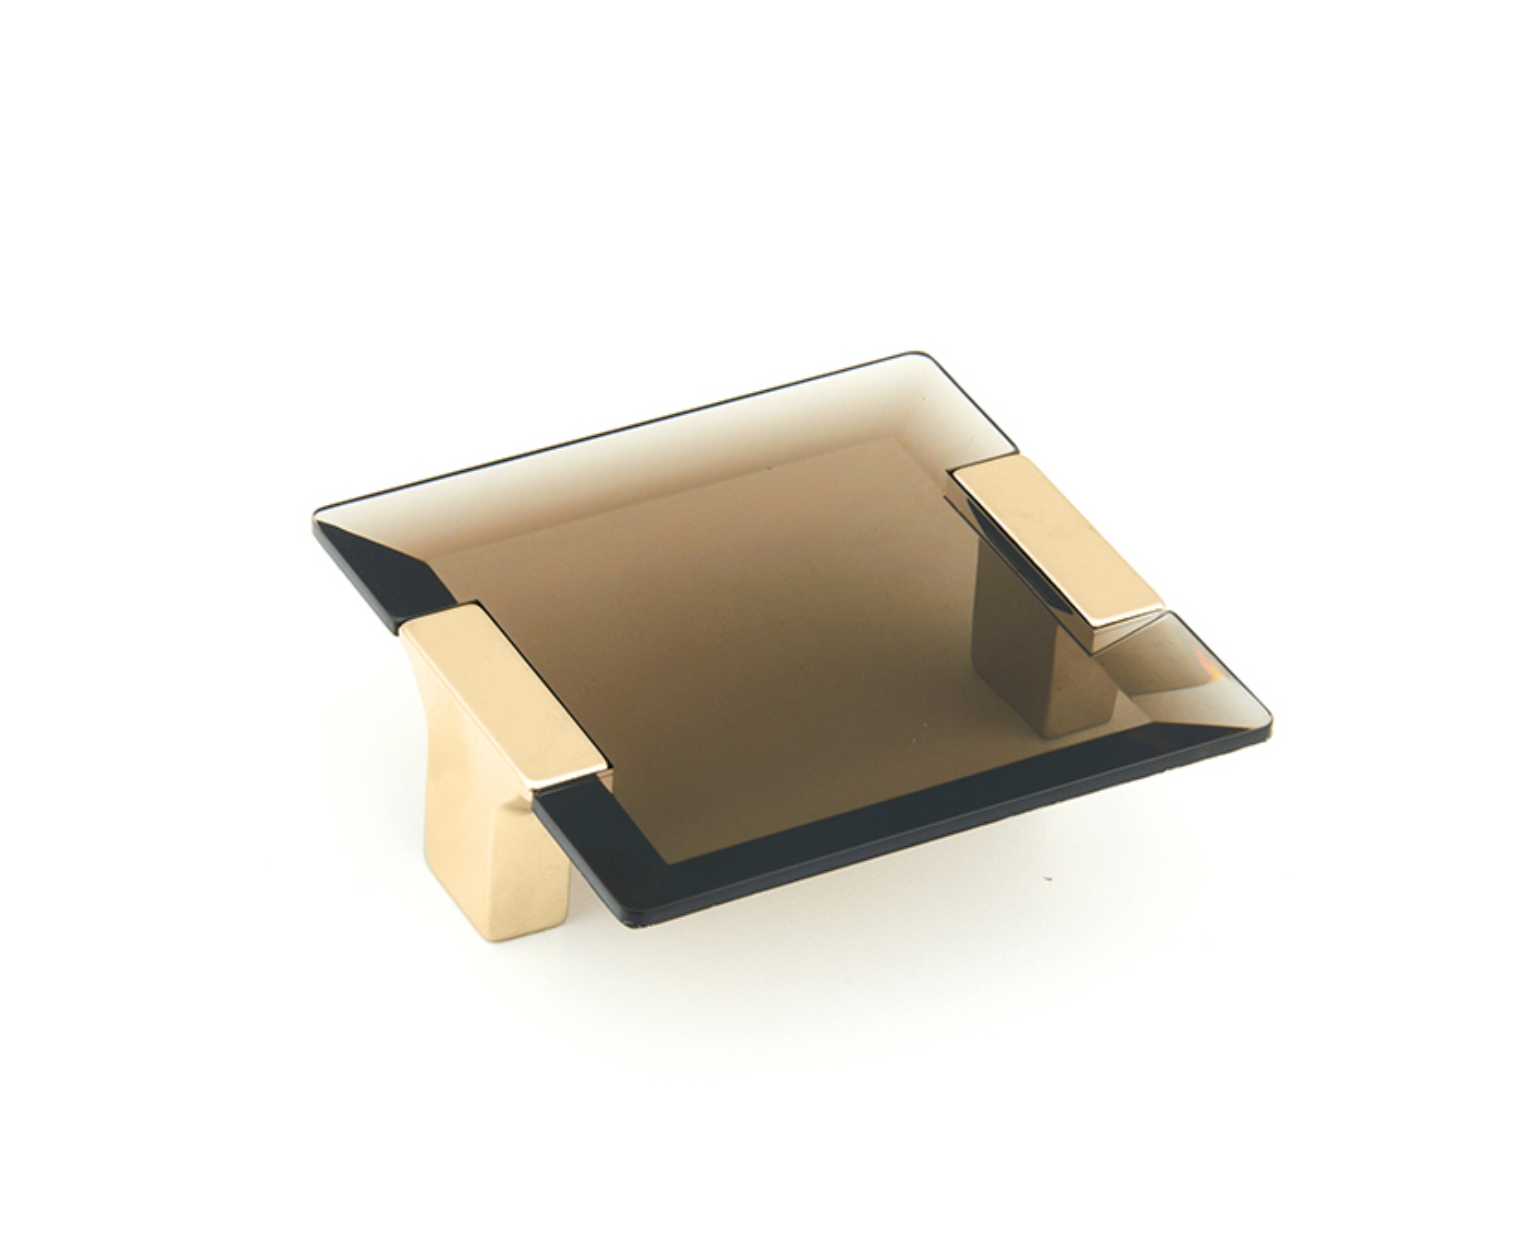 Satin Brass "Ponce" Smoked Glass Cabinet Knob and Drawer Pulls - Industry Hardware